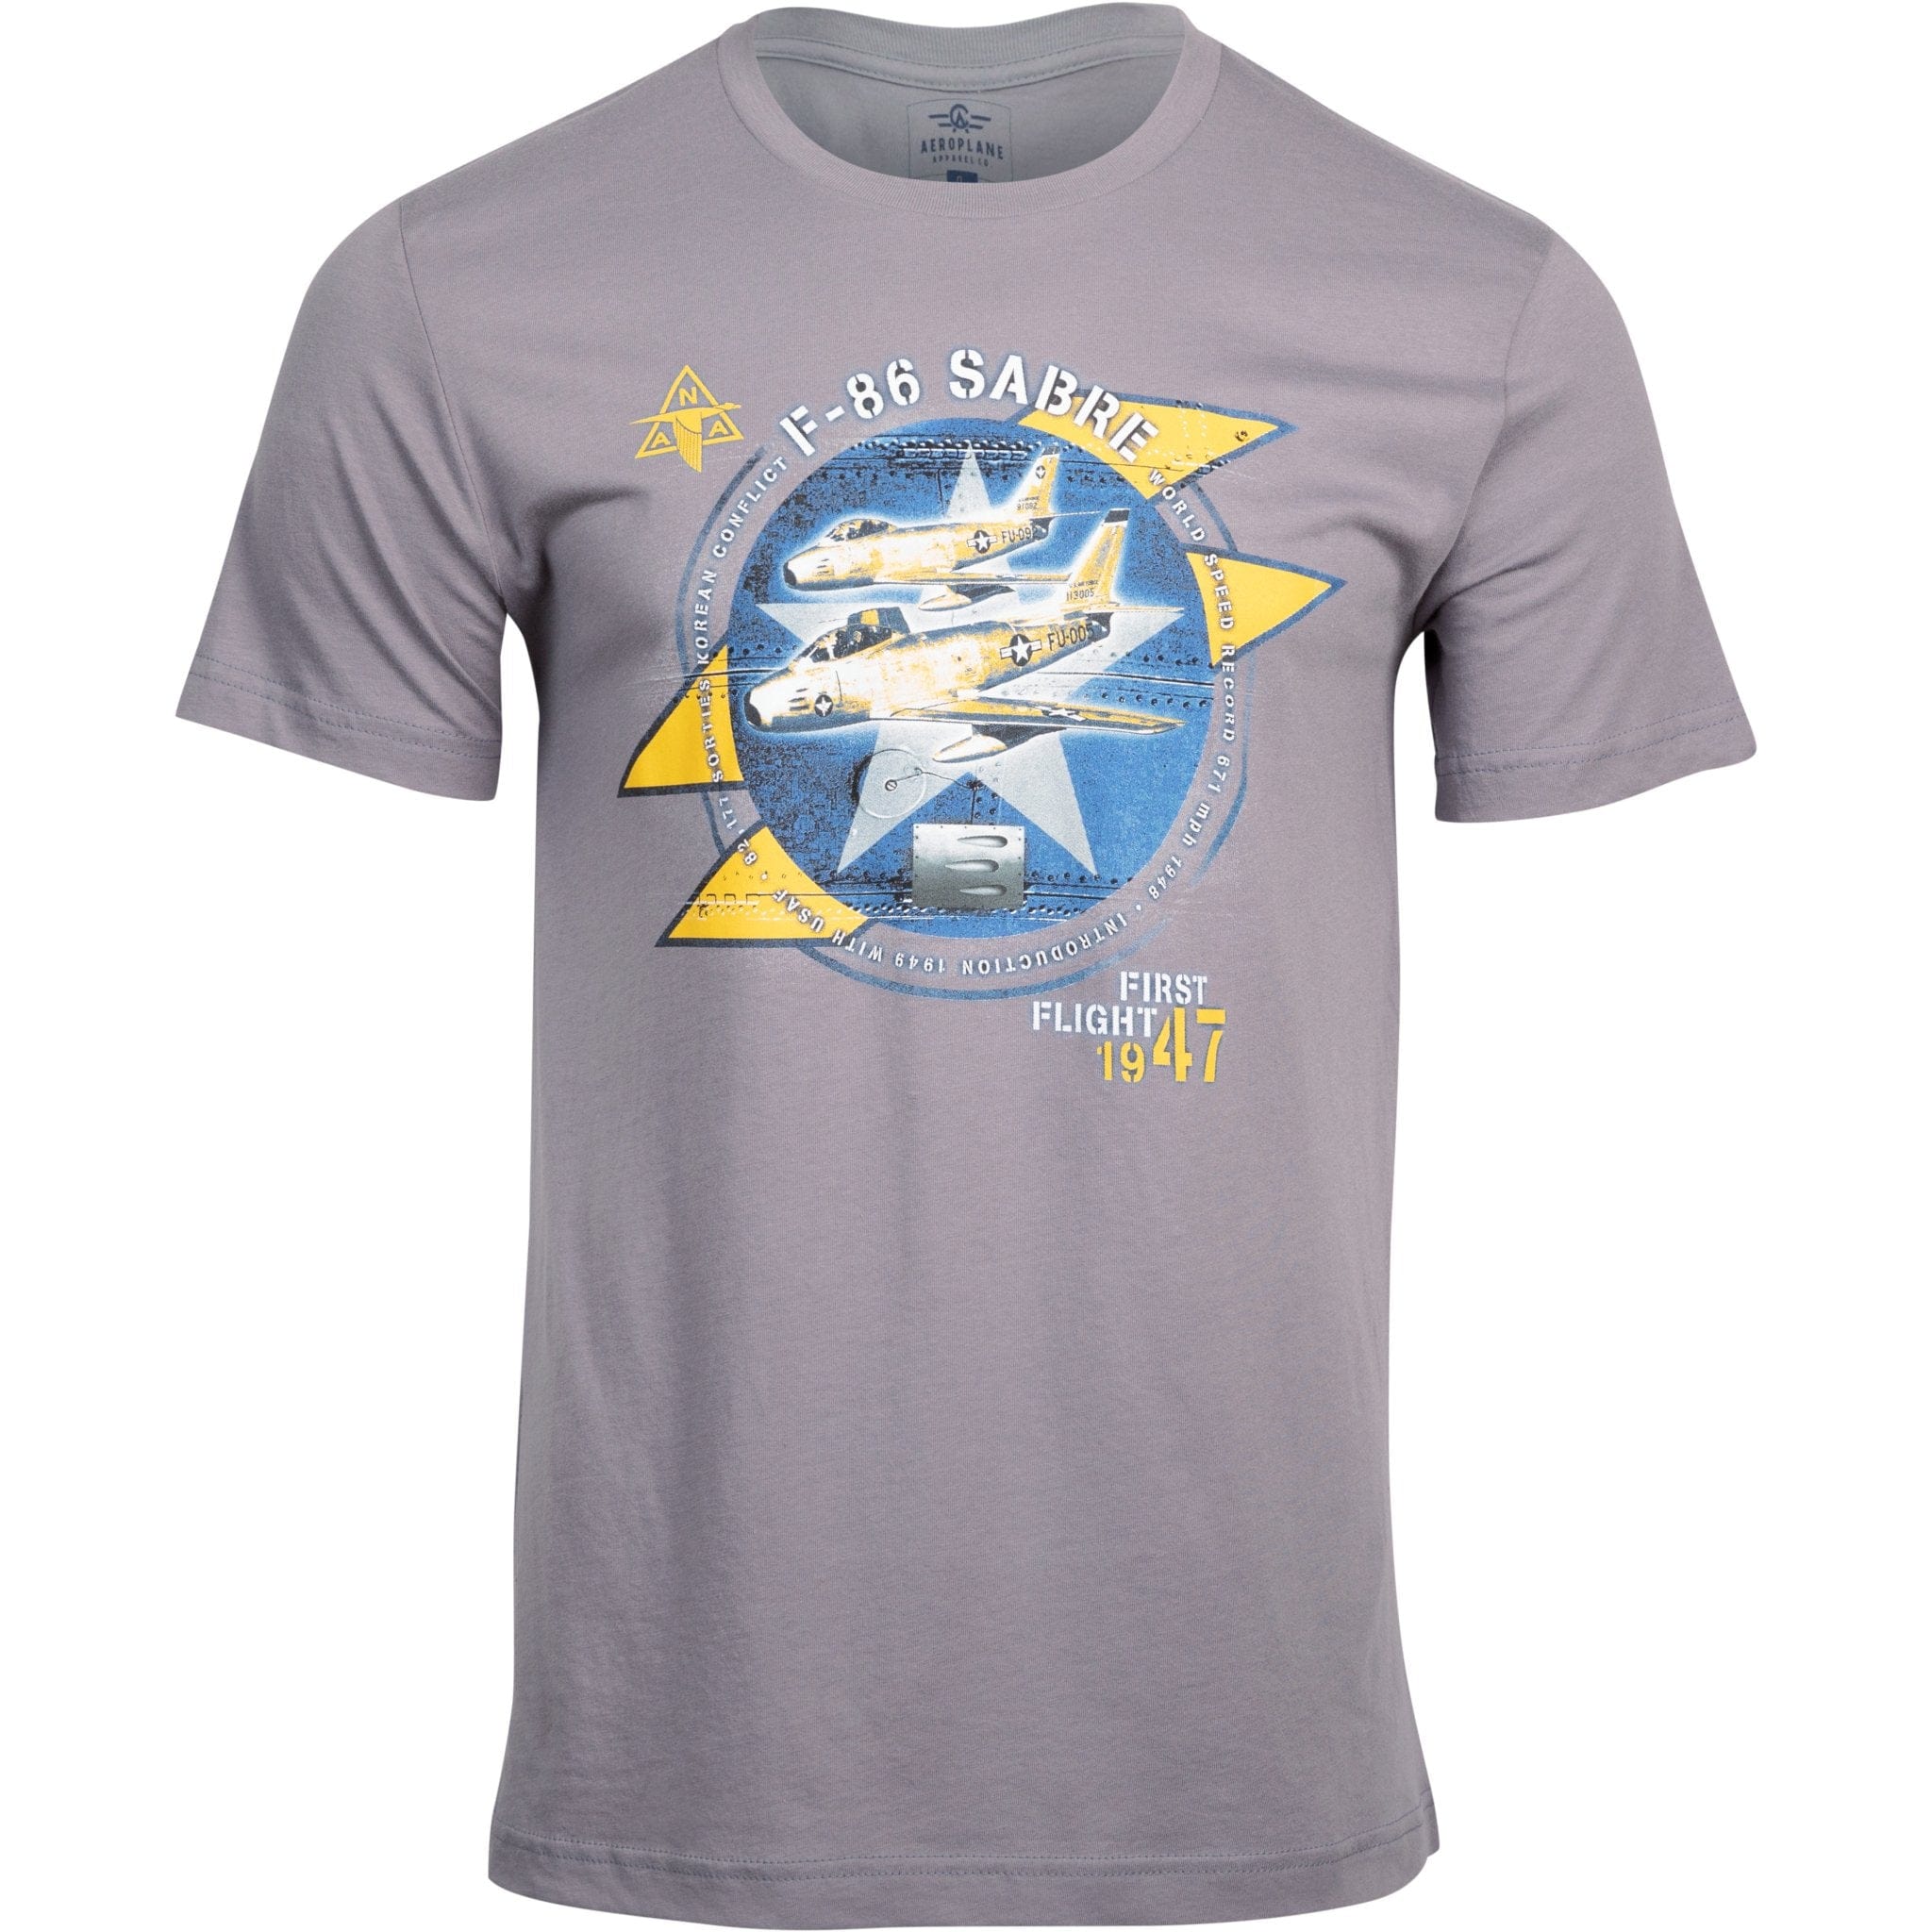 F-86 Sabre Officially Licensed Aeroplane Apparel Co. Men's T-Shirt